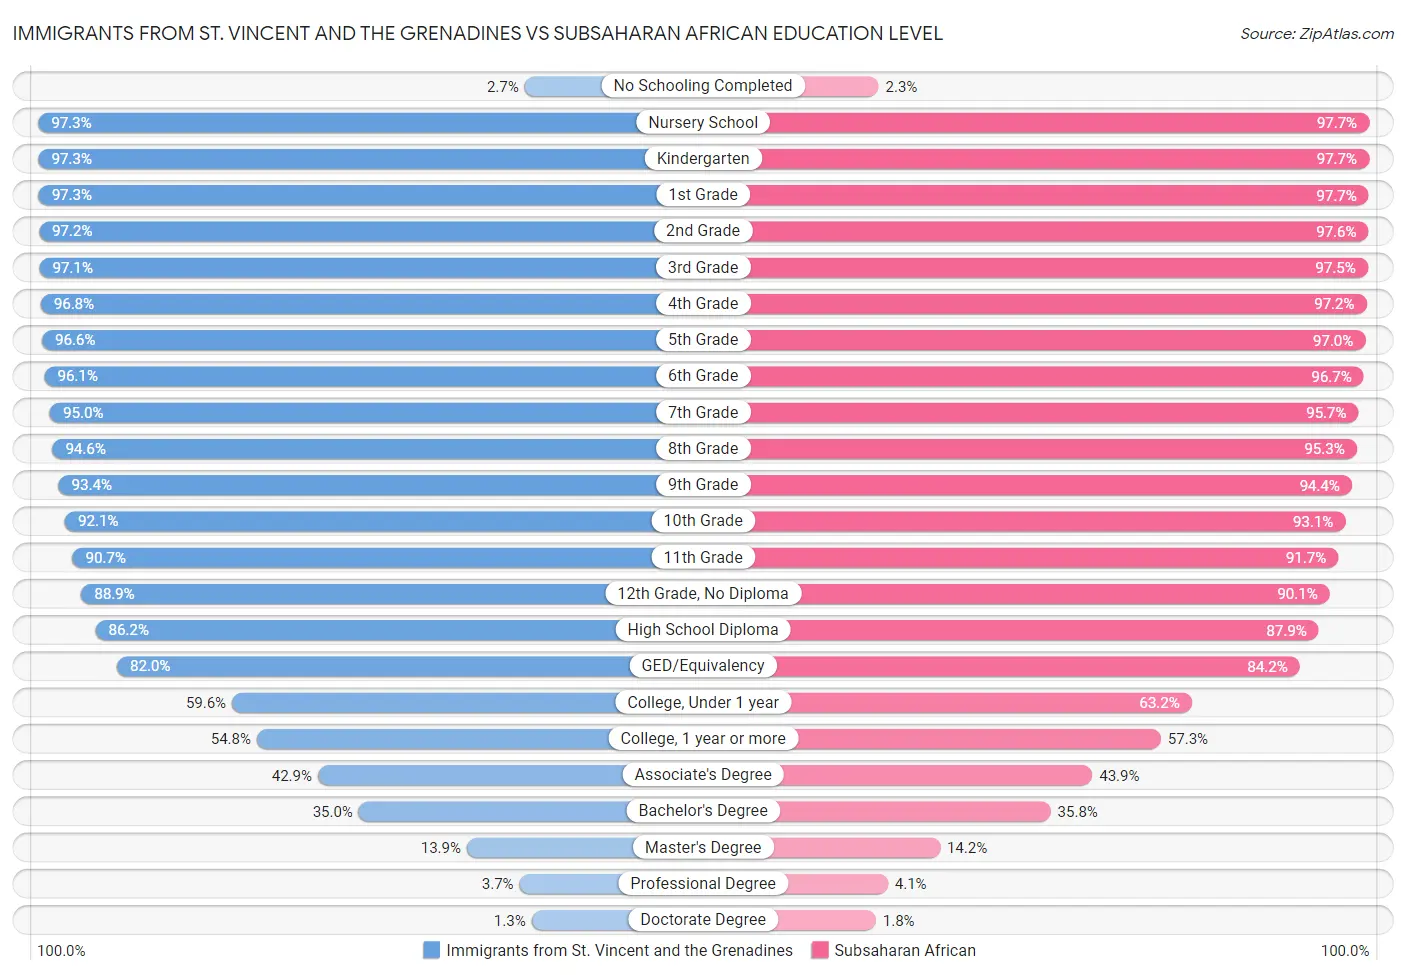 Immigrants from St. Vincent and the Grenadines vs Subsaharan African Education Level